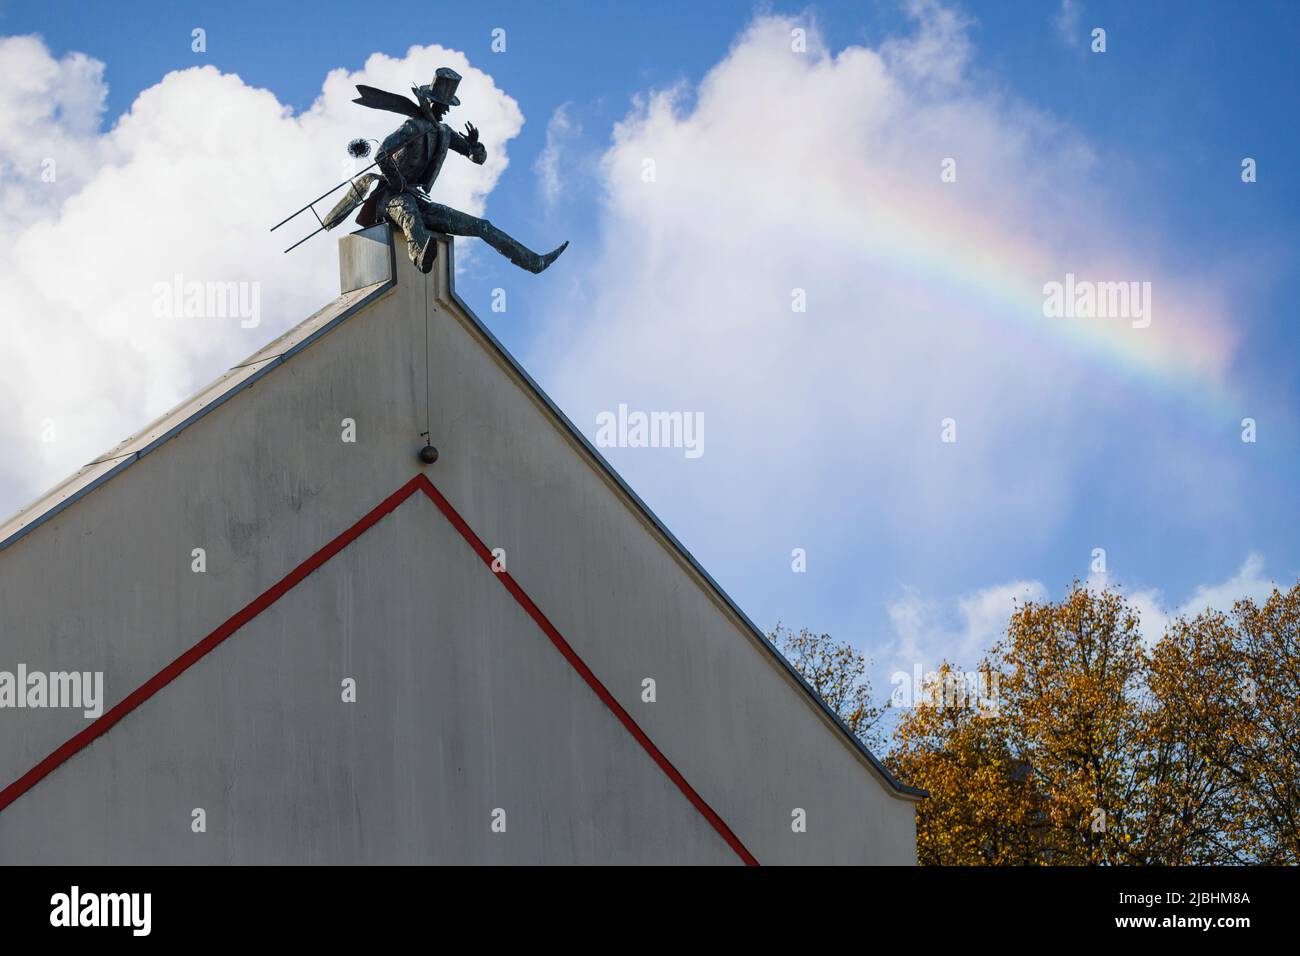 Chimney Sweeper Sculpture on roof in old town of Klaipeda, Lithuania. House wall in Klaipeda Old Town. Blue sky with white clouds and rainbow. Stock Photo